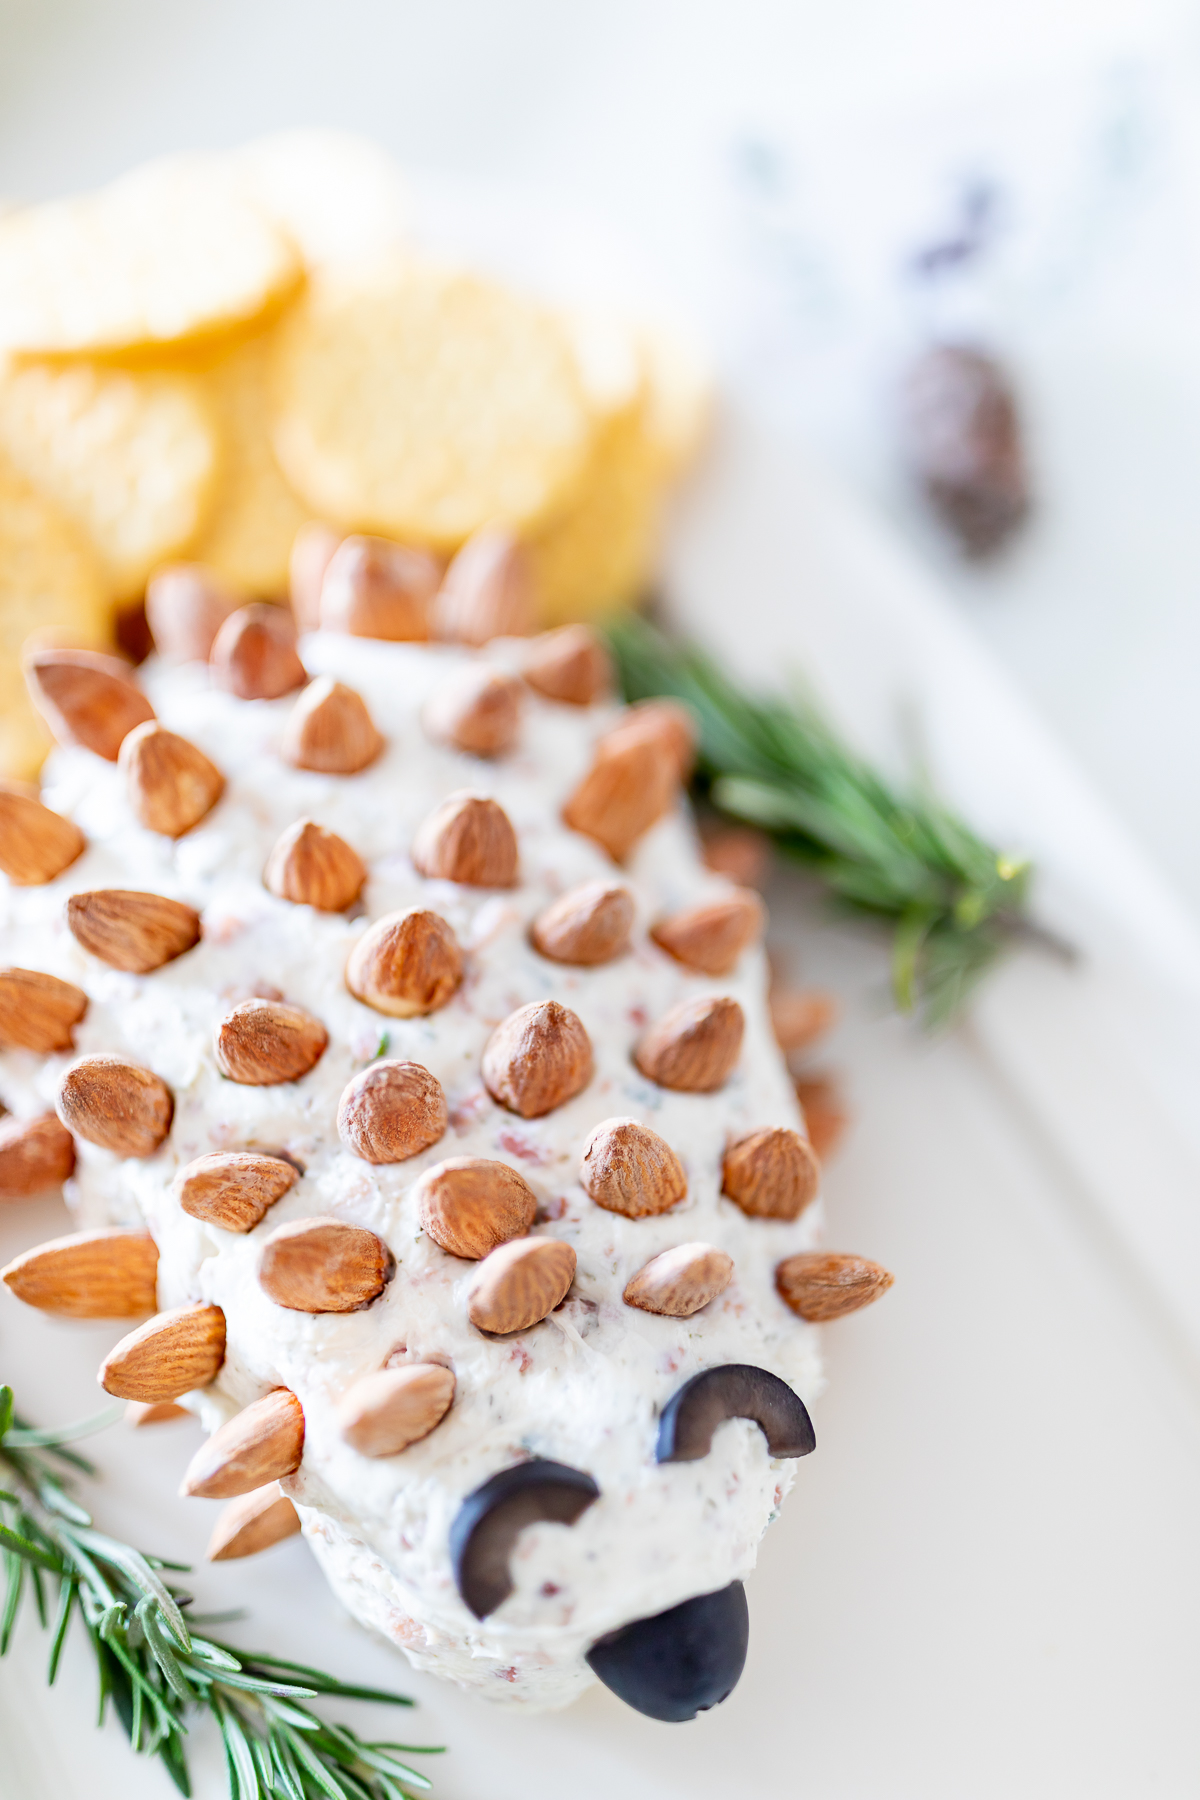 A plate with a Christmas cheese ball hedgehog made of almonds and rosemary.